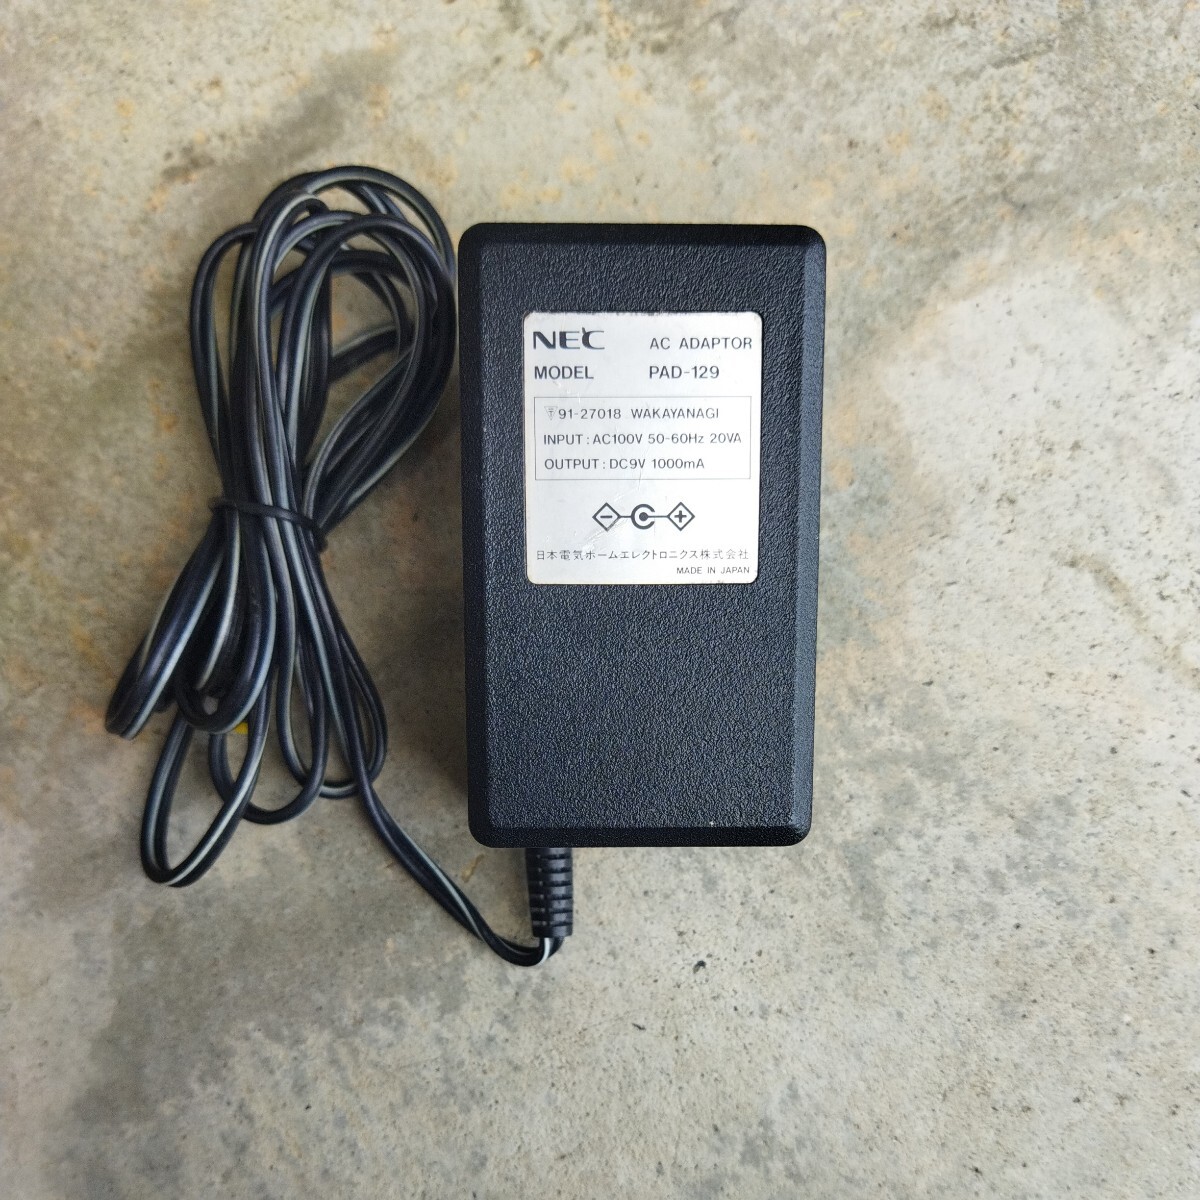 PC engine DUO-R power supply adaptor PAD-129 electrification has confirmed 